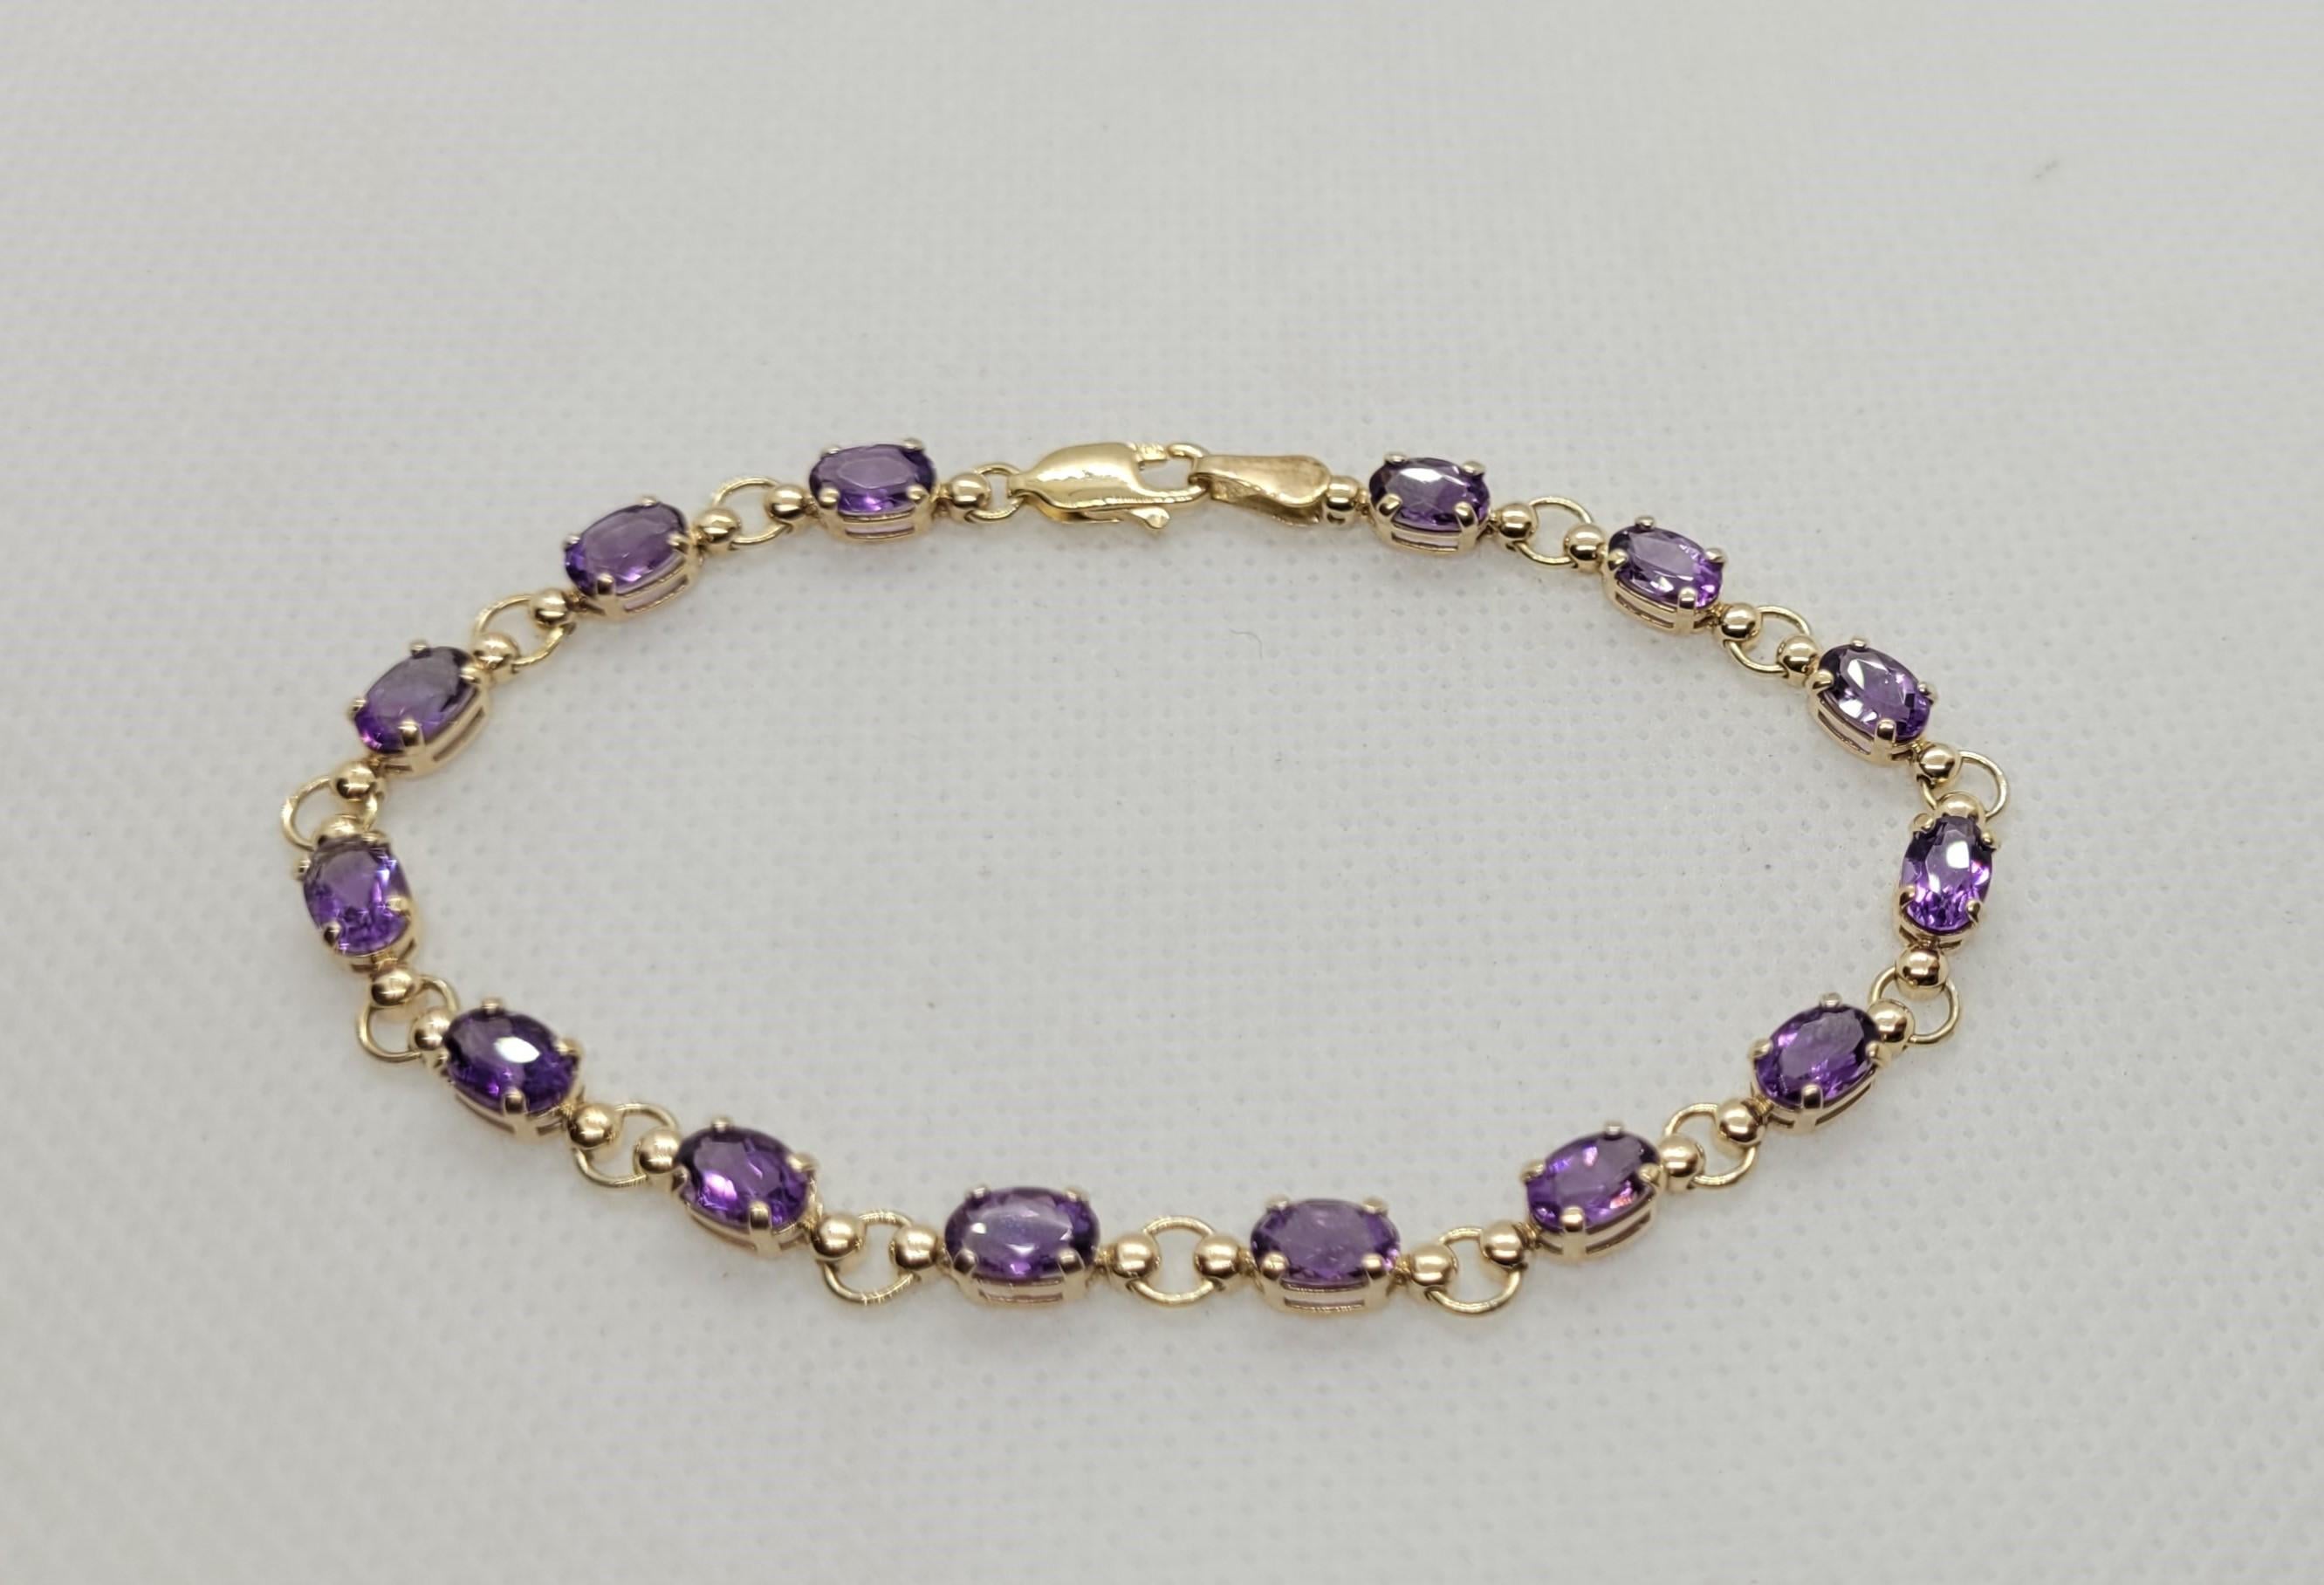 Yellow Gold Amethyst Bracelet, 6 x 4 mm Oval Amethyst, 10kt Gold, 7.25 Inches In Good Condition For Sale In Rancho Santa Fe, CA